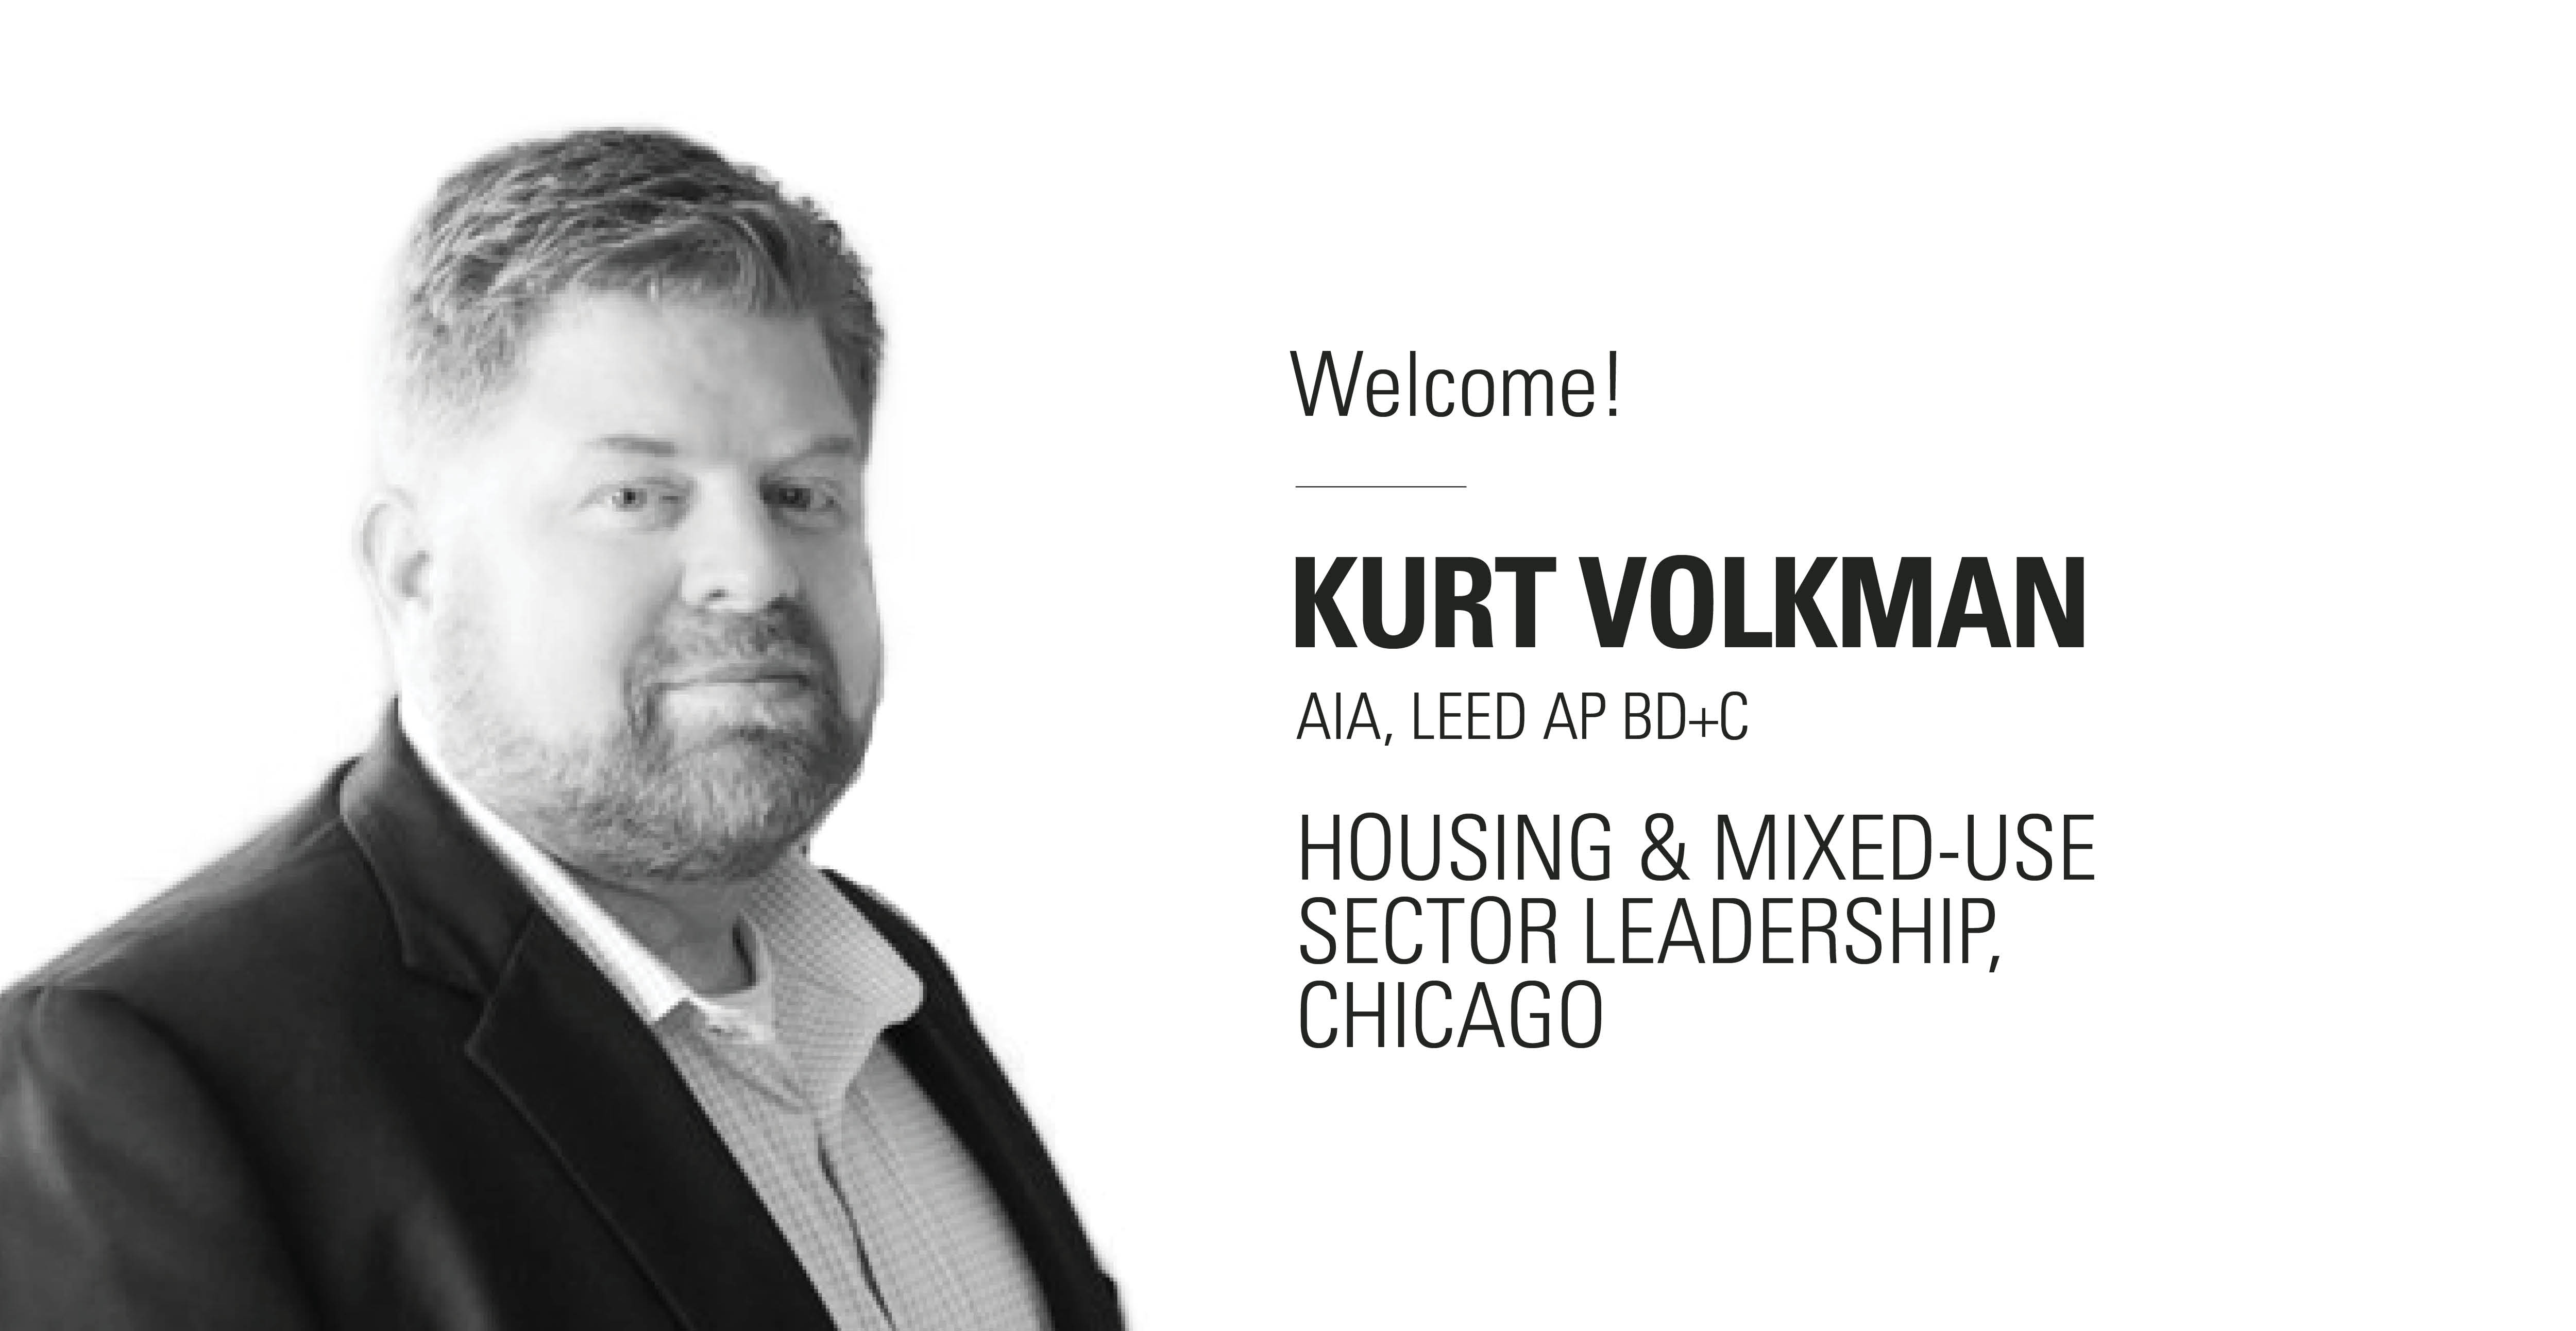 /HED%20welcomes%20Kurt%20Volkman%20as%20new%20Housing%20%26%20Mixed-Use%20Sector%20Leadership%20in%20Chicago